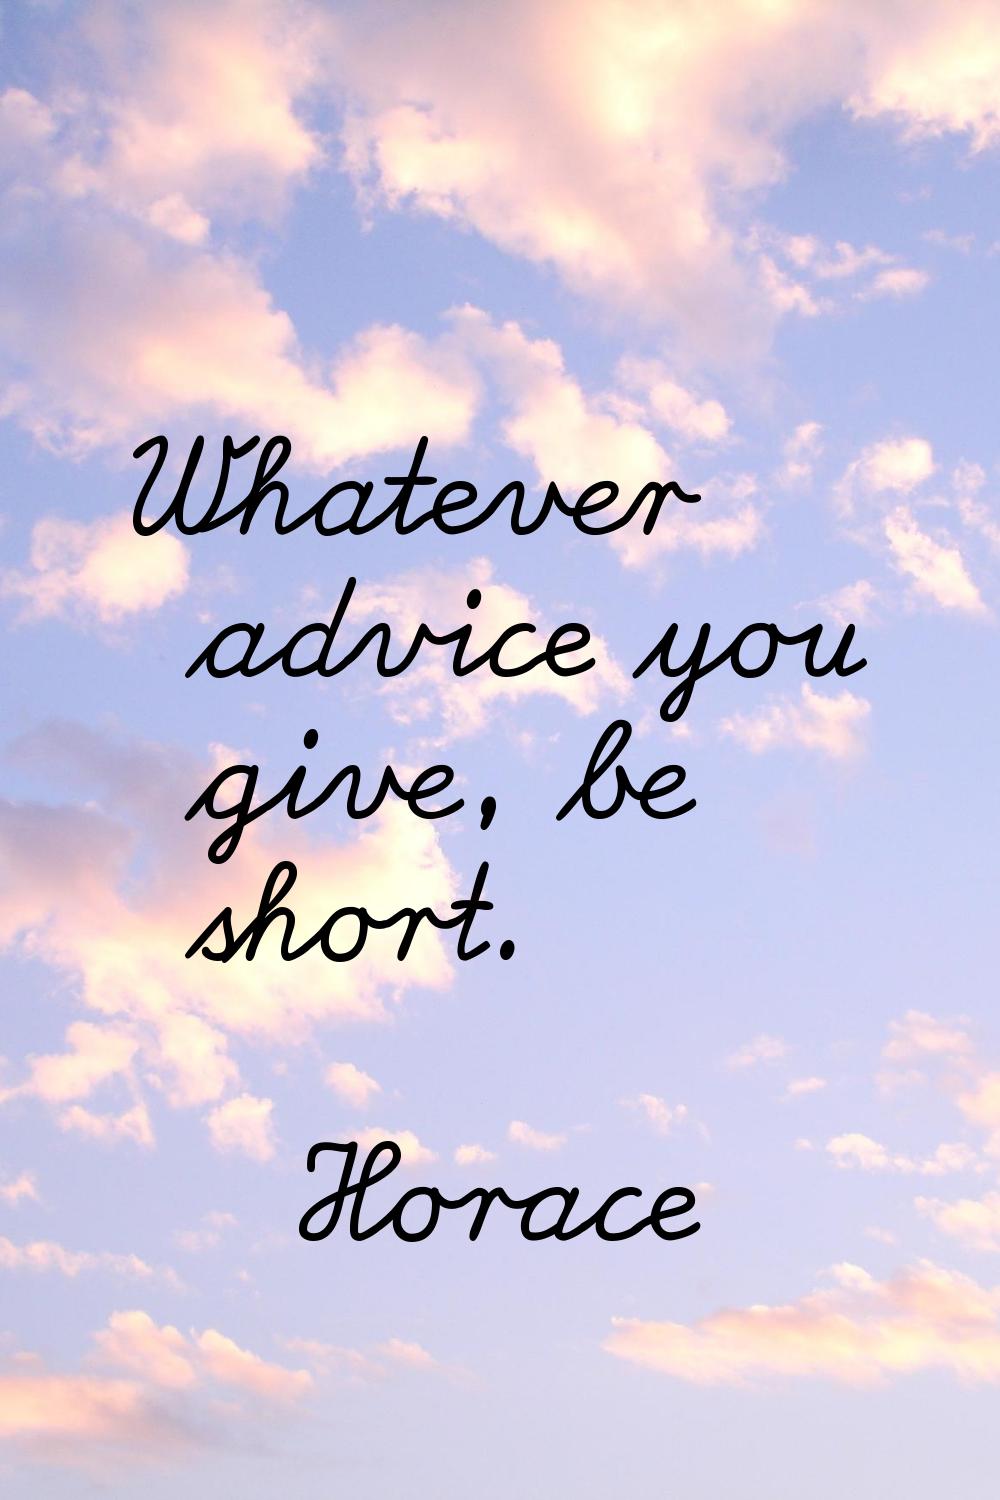 Whatever advice you give, be short.